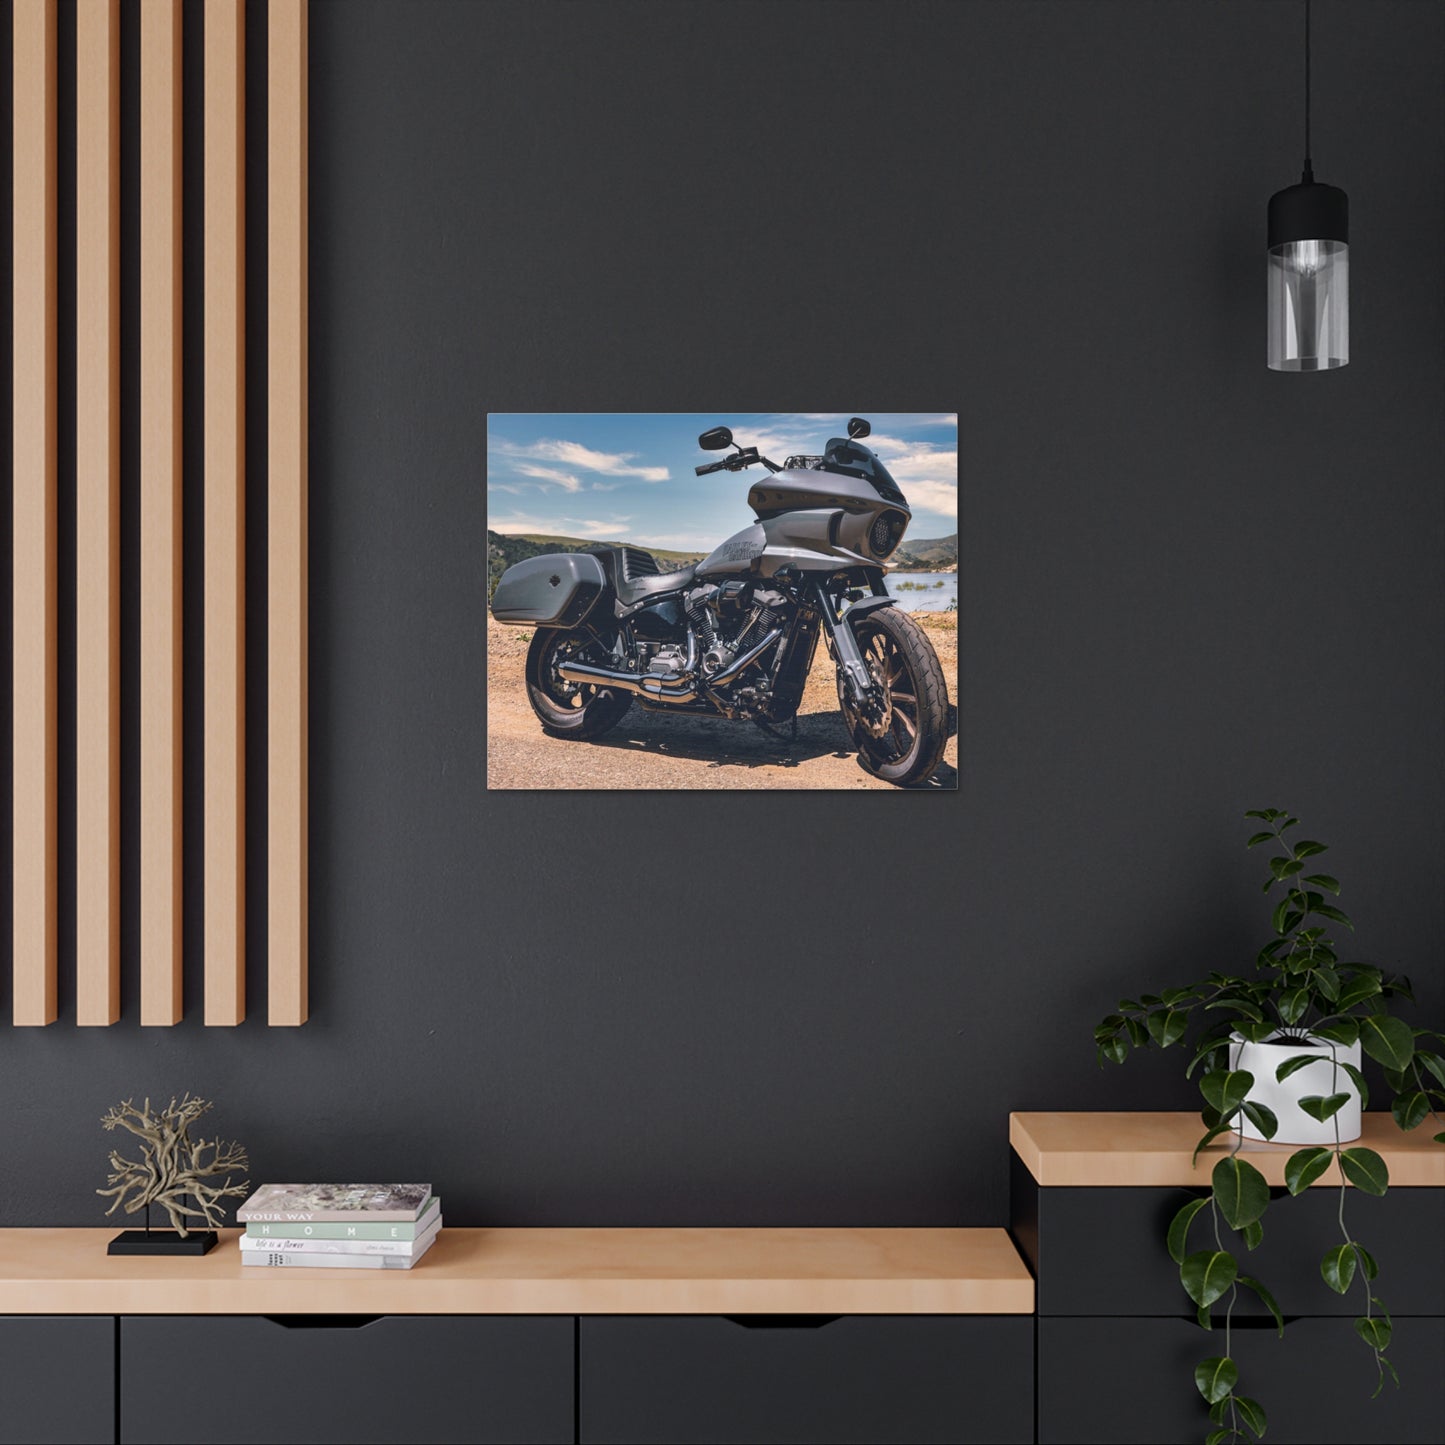 Softail M8 FXLRST - Oak Canyon Ranch, California Canvas Gallery Wraps